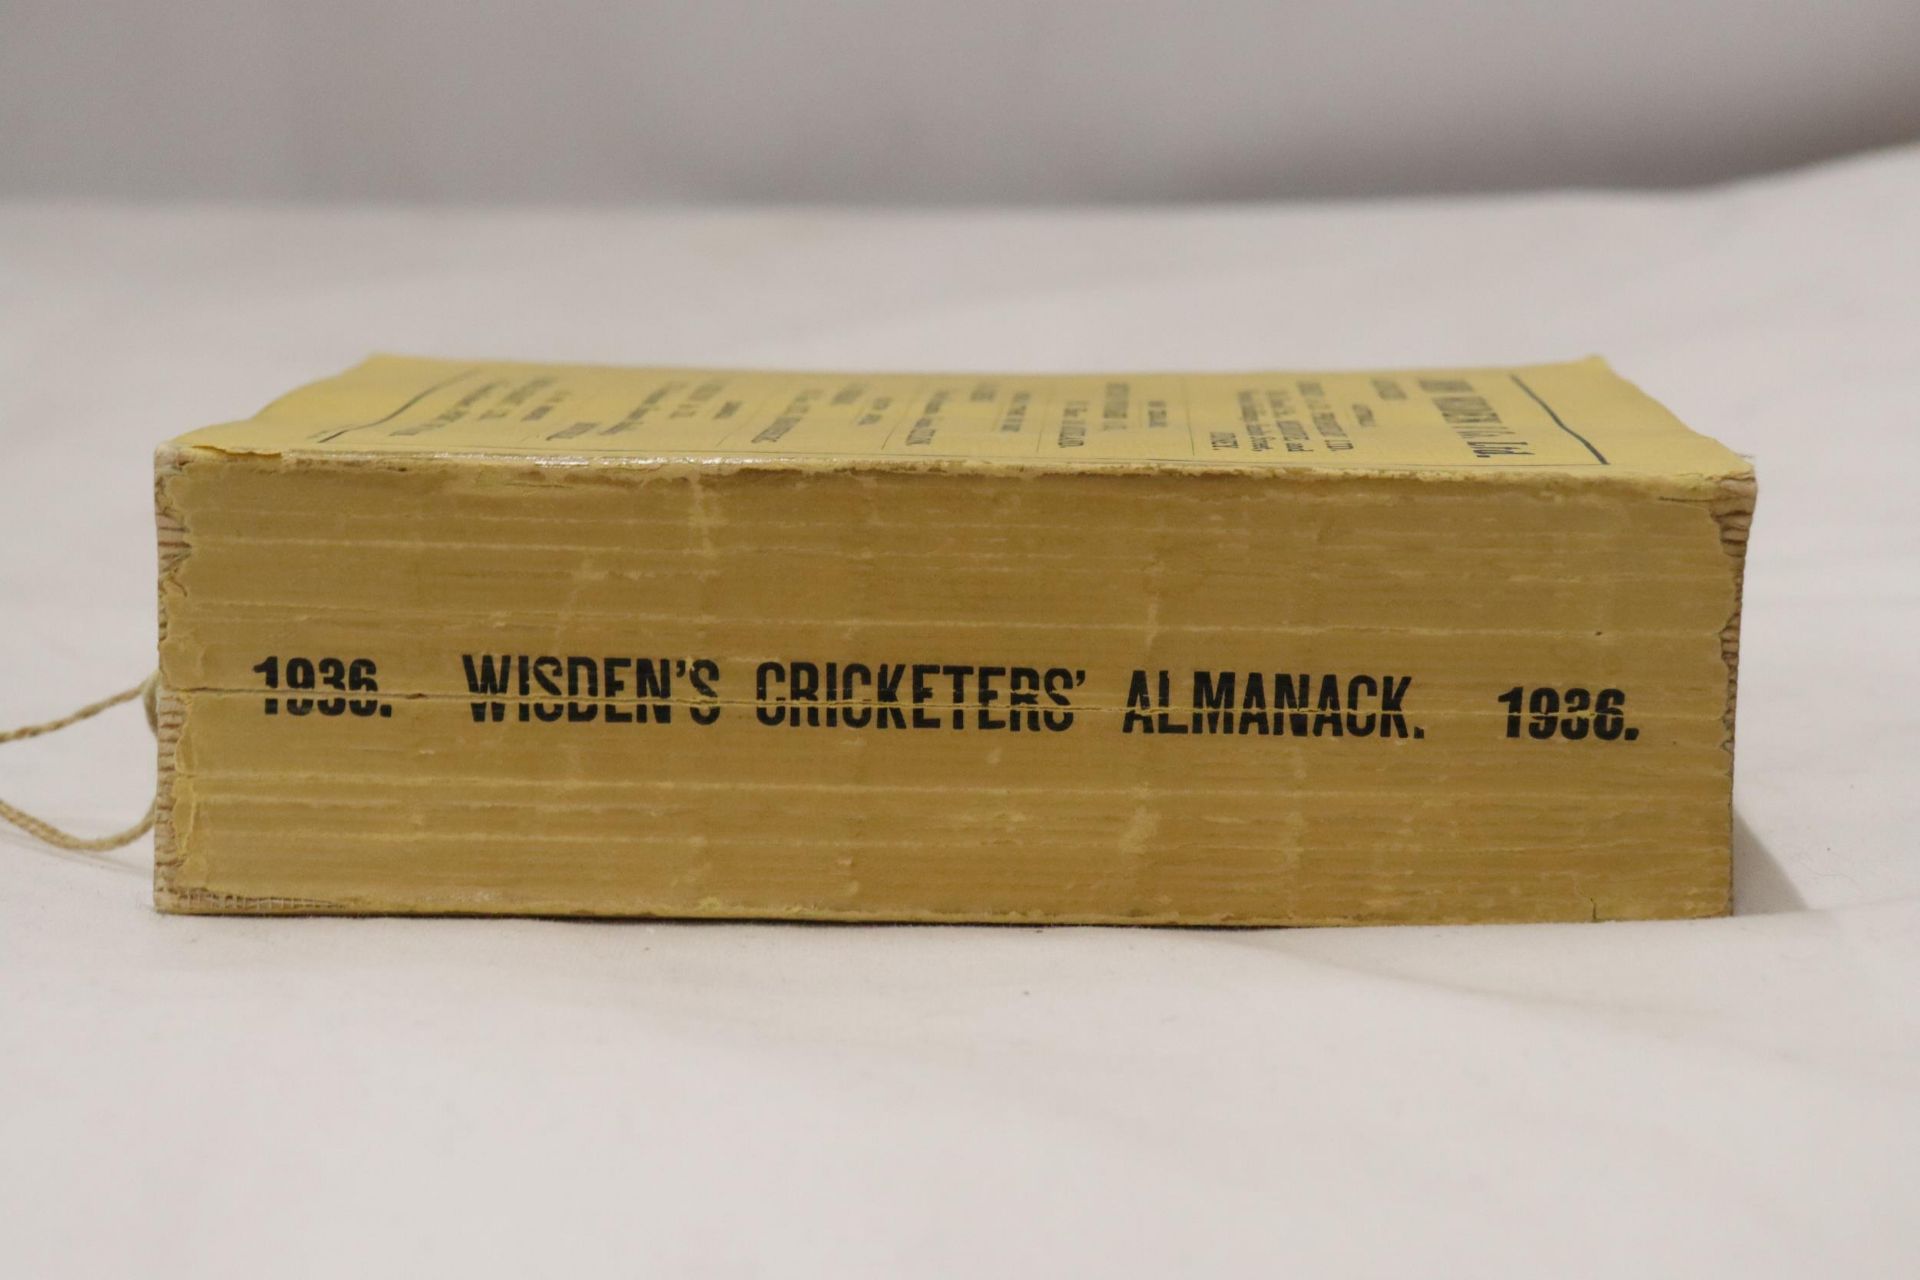 A 1936 COPY OF WISDEN'S CRICKETER'S ALMANACK. THIS COPY IS IN USED CONDITION, THE SPINE IS INTACT - Image 2 of 5